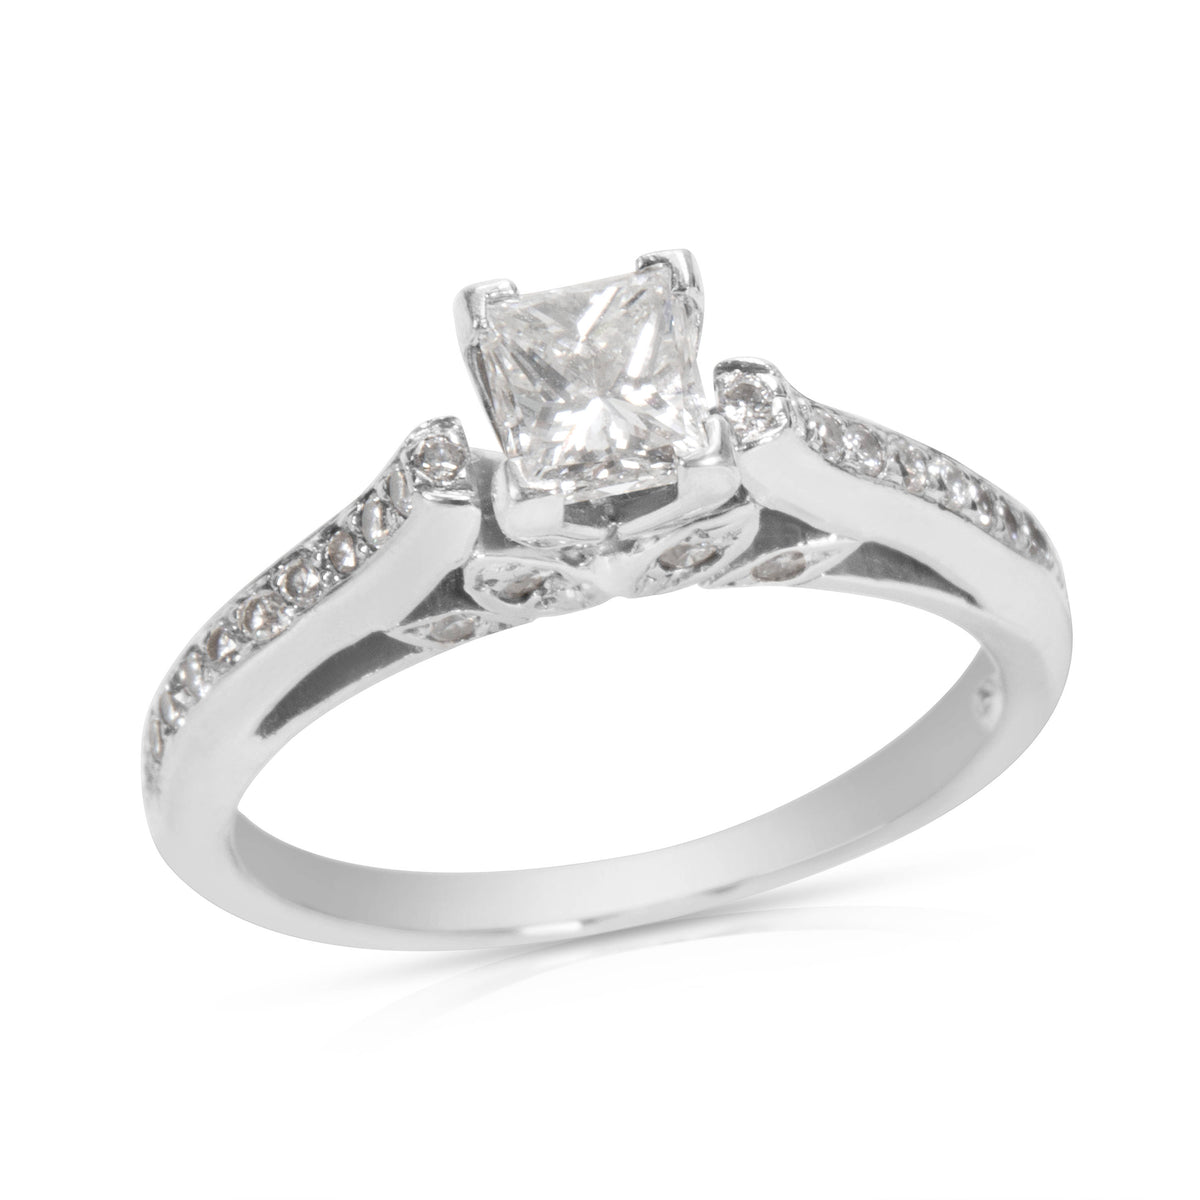 Princess Cut Diamond Engagement Ring in 14K White Gold with Diamonds (0.98 CTW)